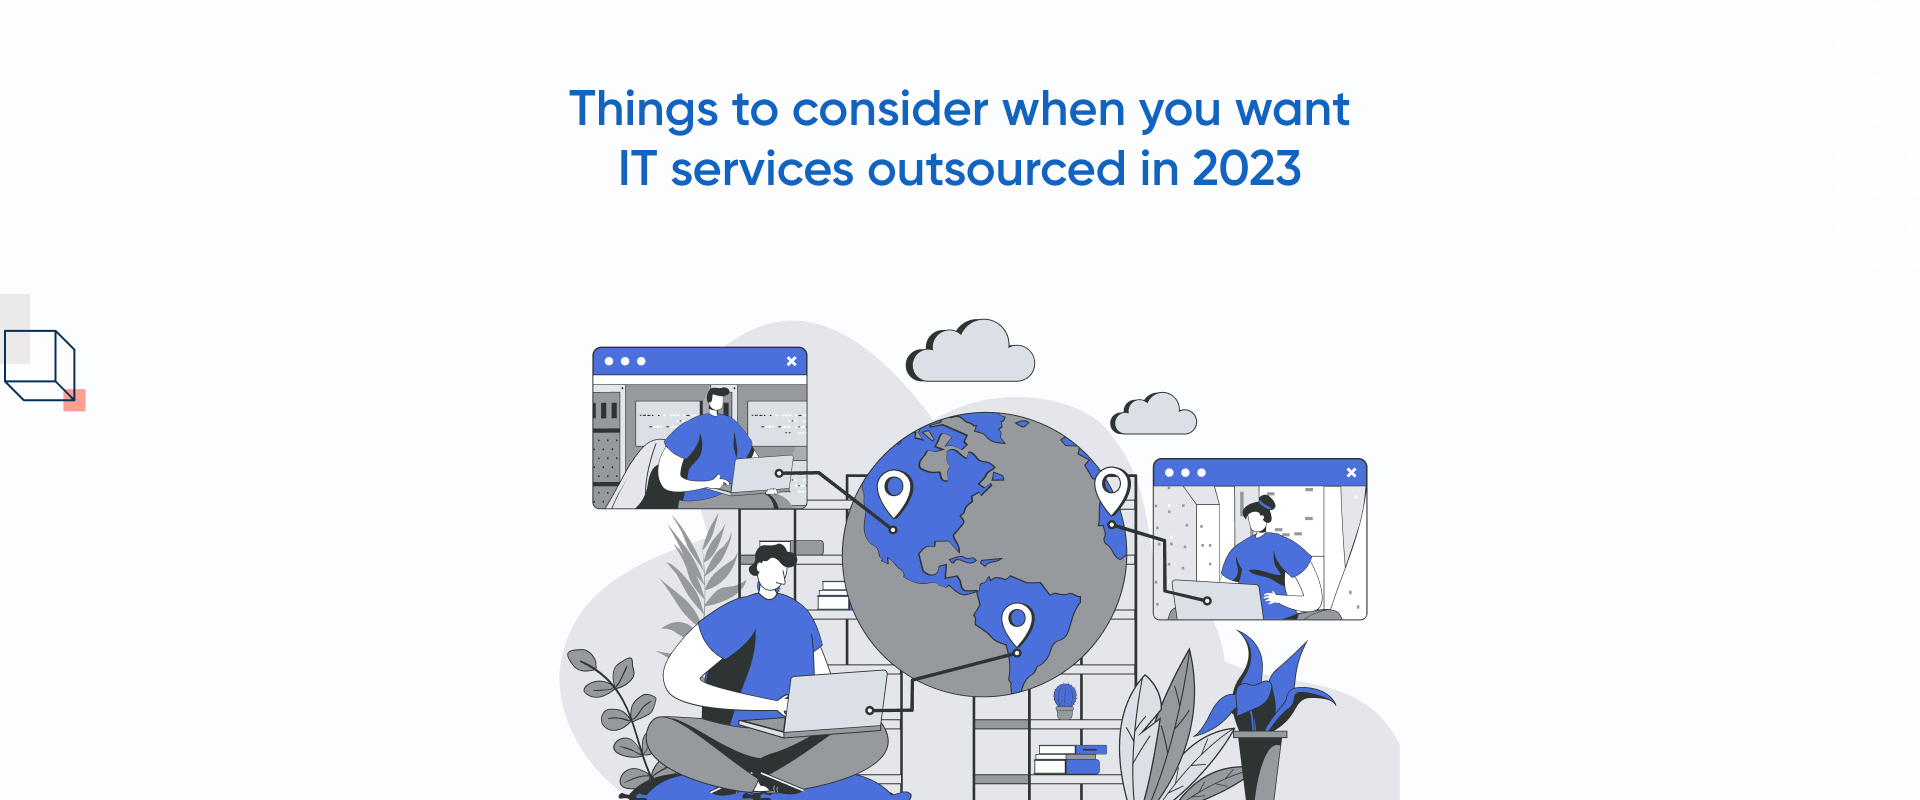 Things to Consider When You Want IT Services Outsourced in 2023